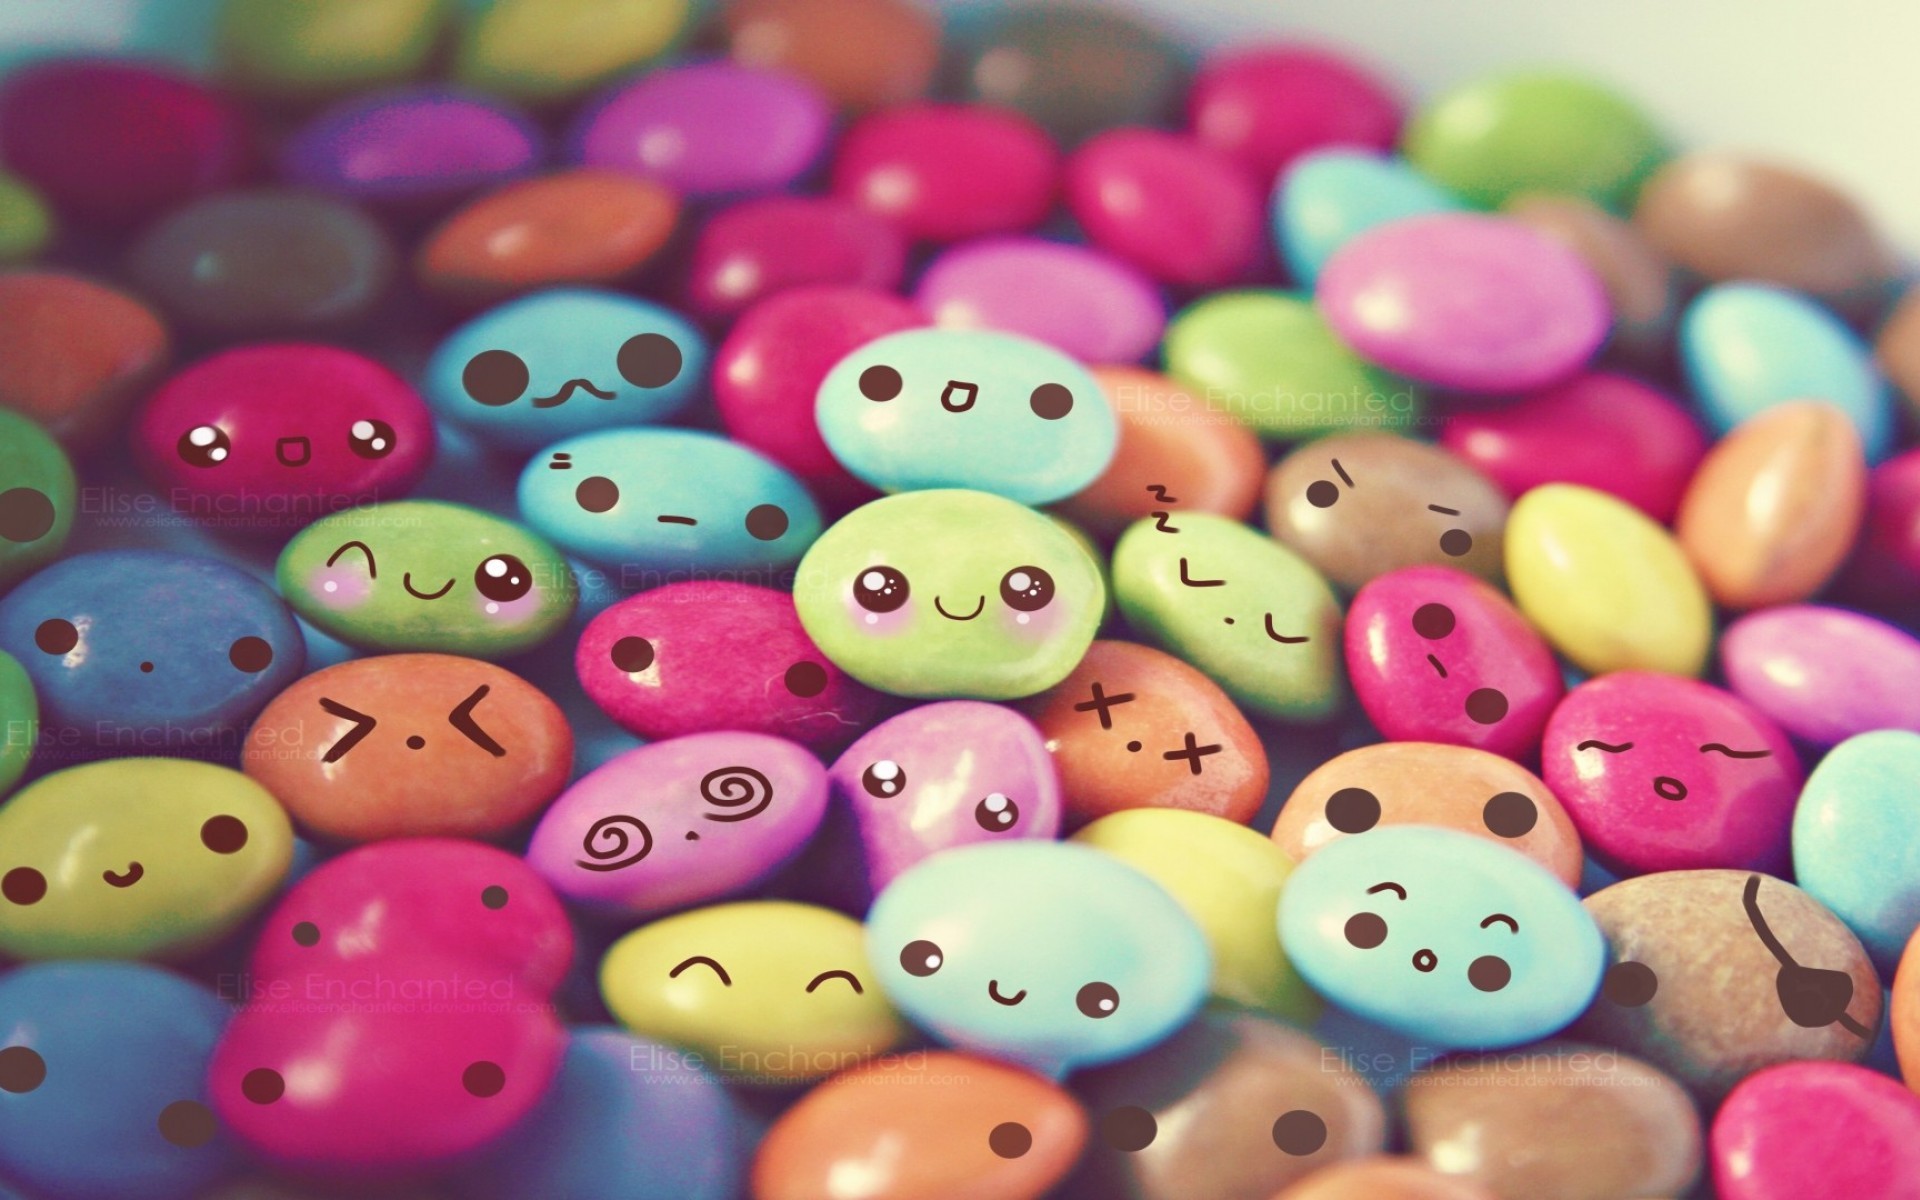 1920x1200 Cute Tumblr Backgrounds Wallpaper / Hd Wallpapers